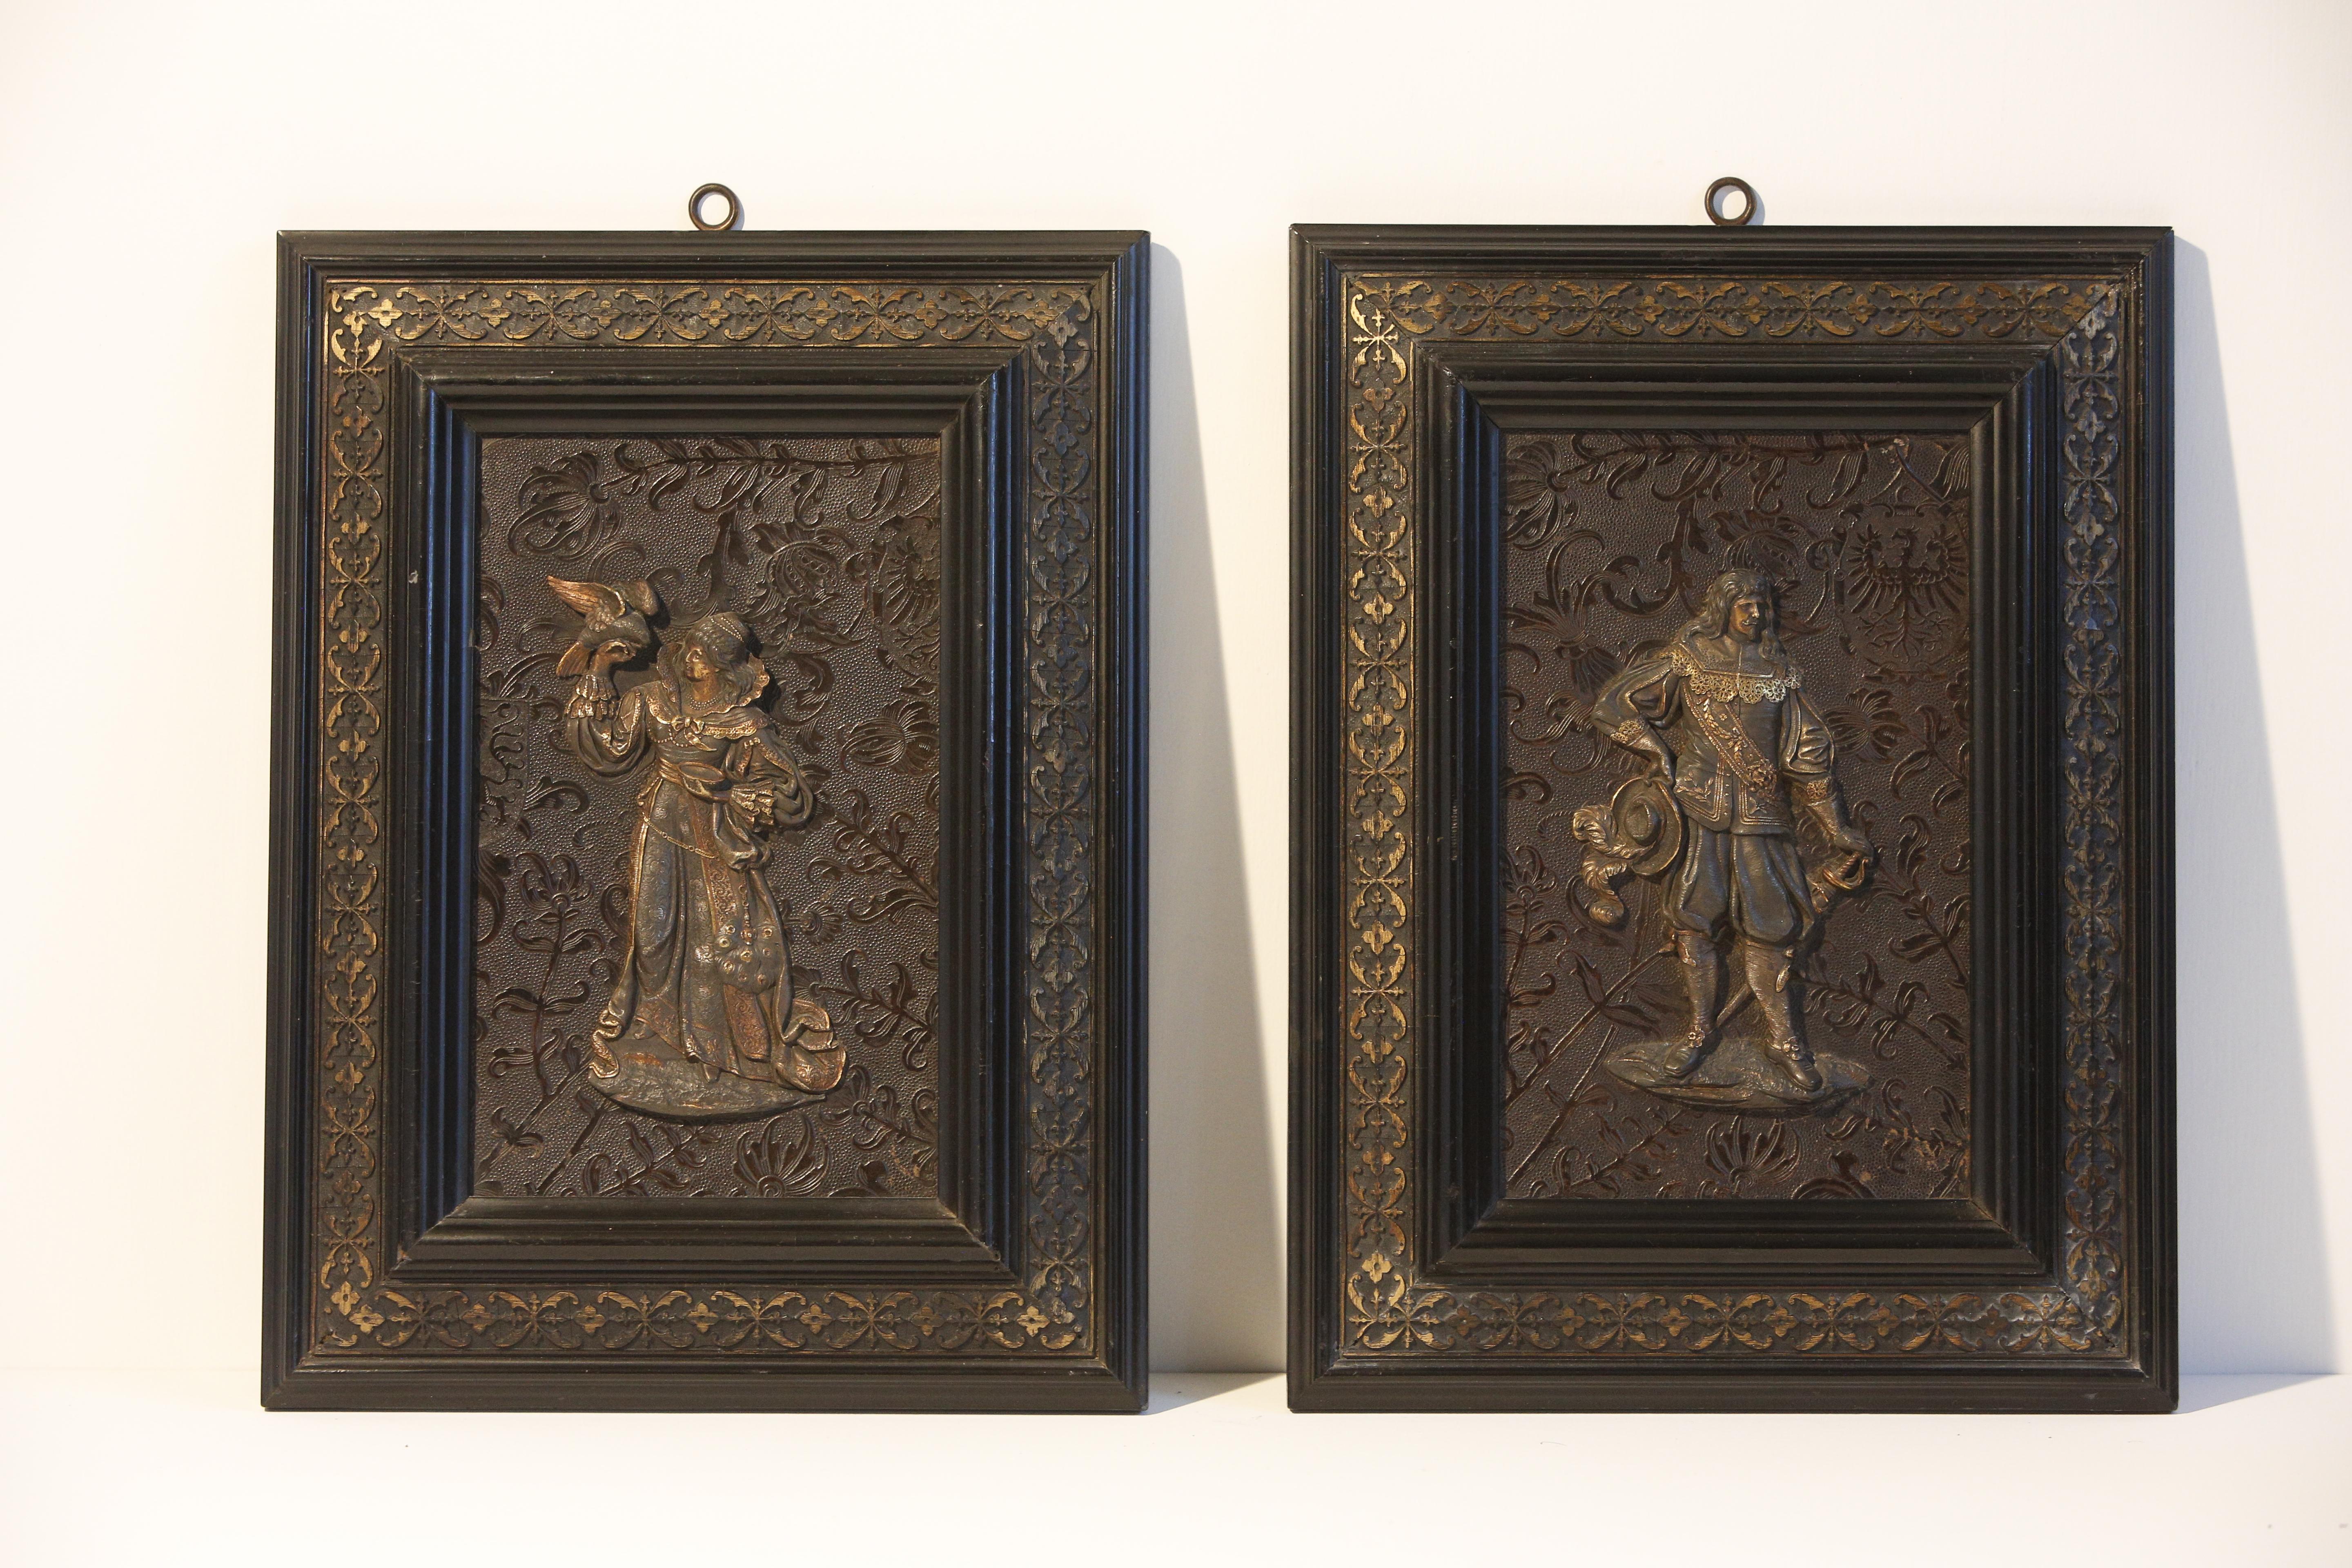 A pair of white metal and gilded bronze relief male and female figures in 17c costumes applied to an embossed decorative panel in ebonized frames. Little nicks and rubbings on the frames commensurate with age and use but otherwise in excellent